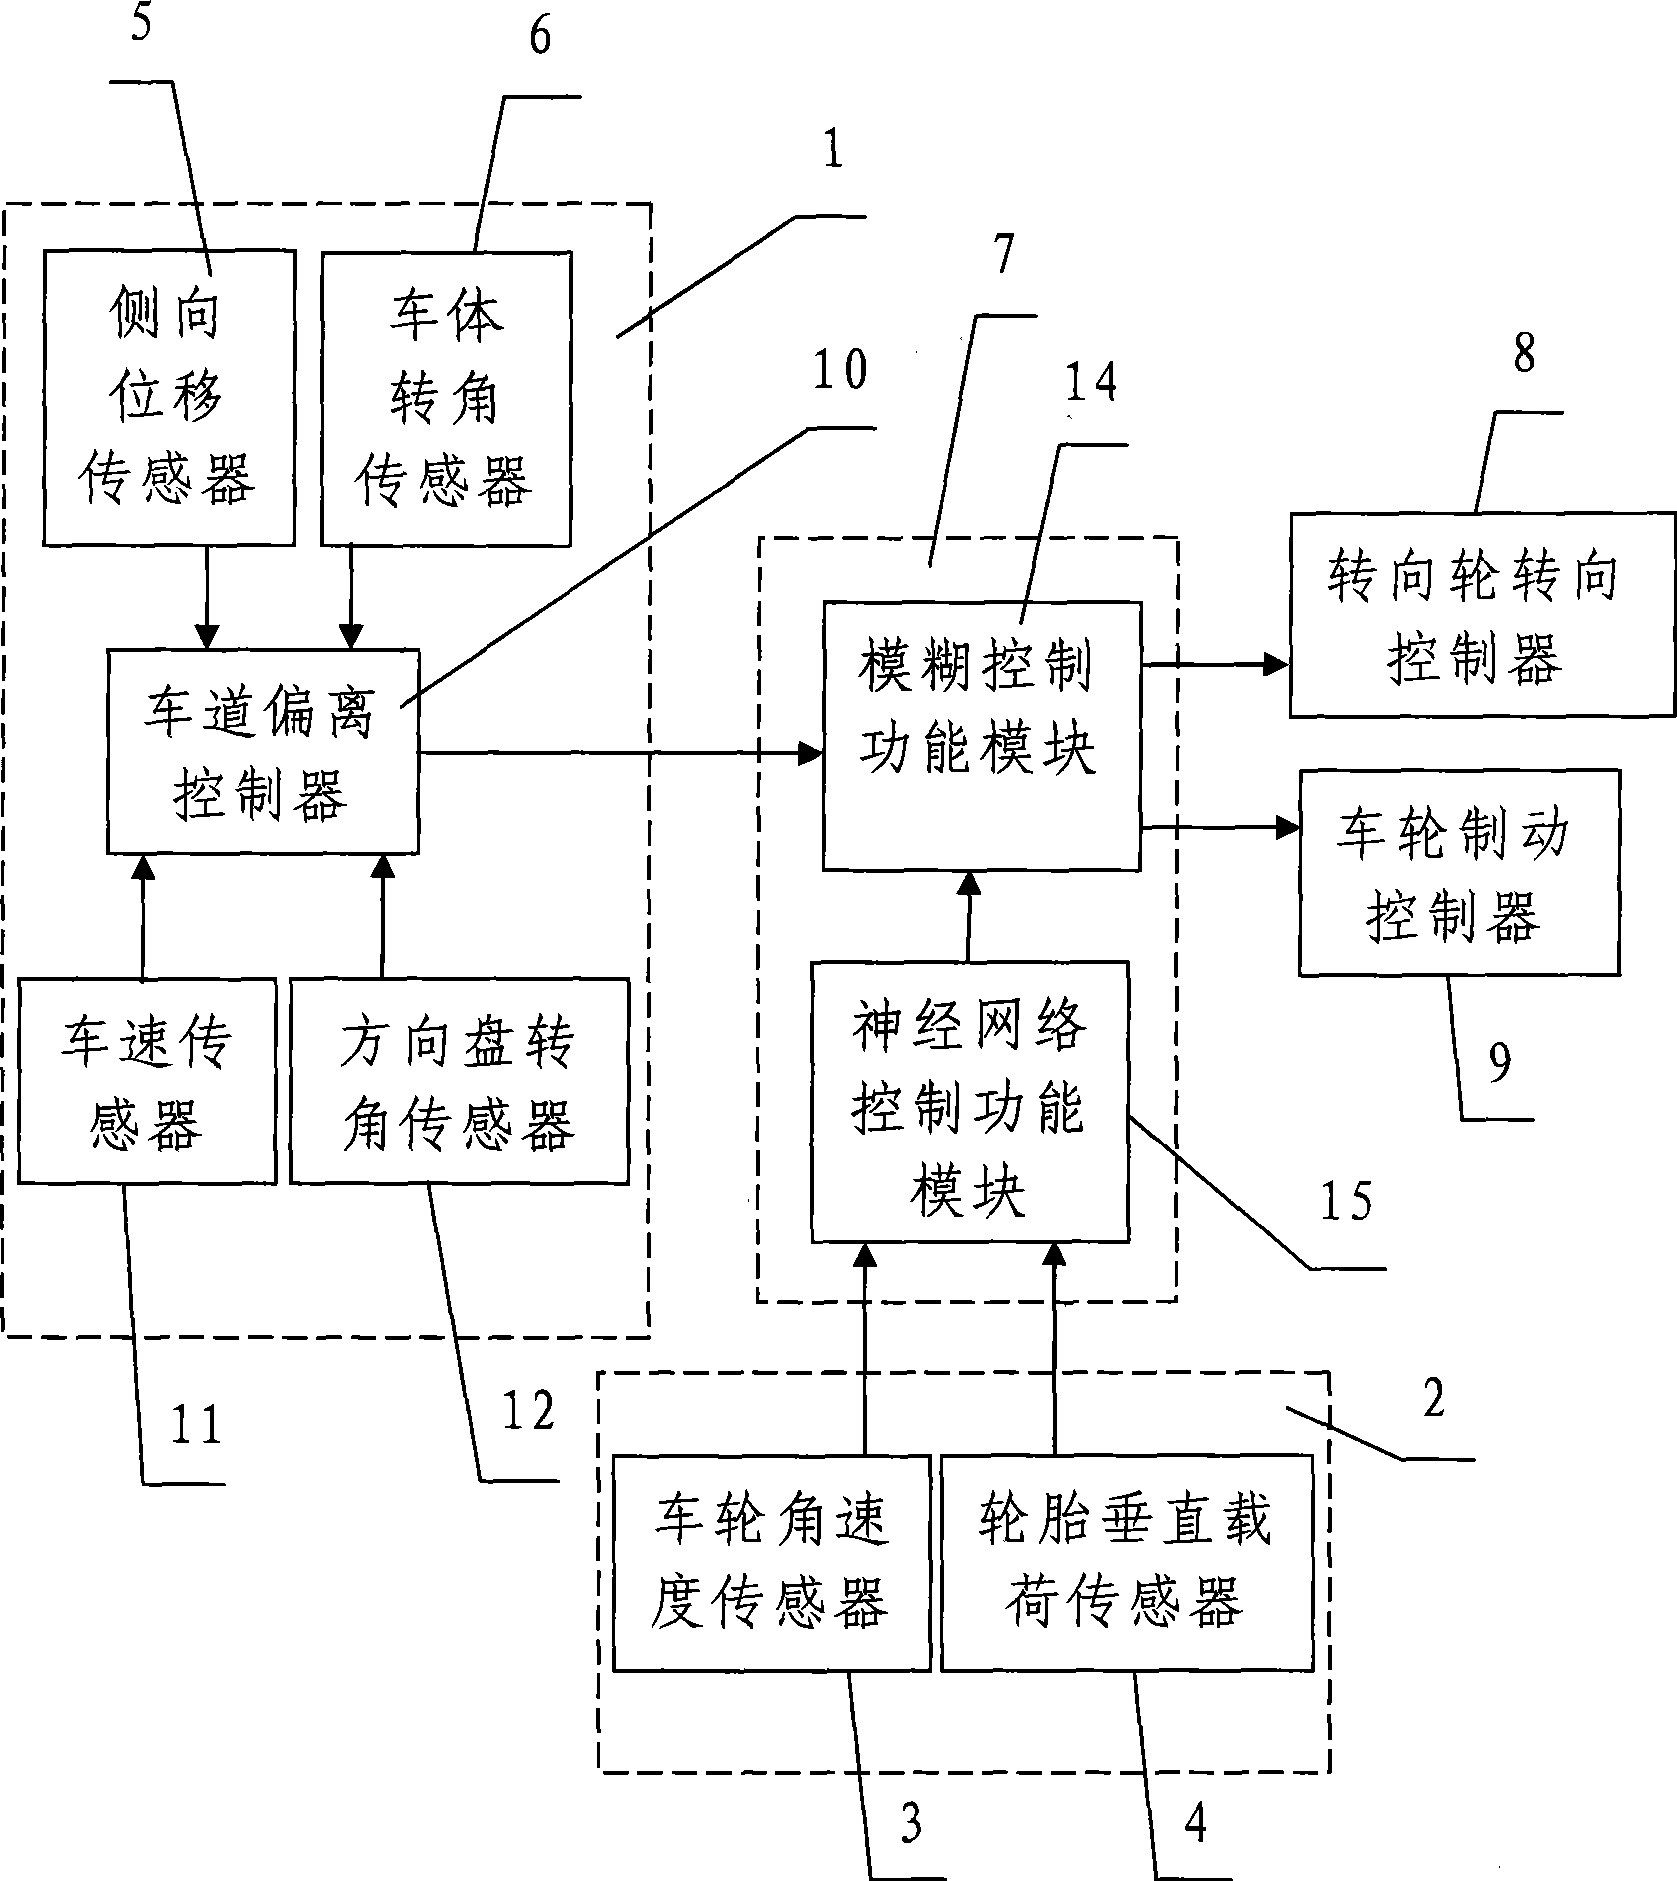 Steering brake stabilization control system of automobile